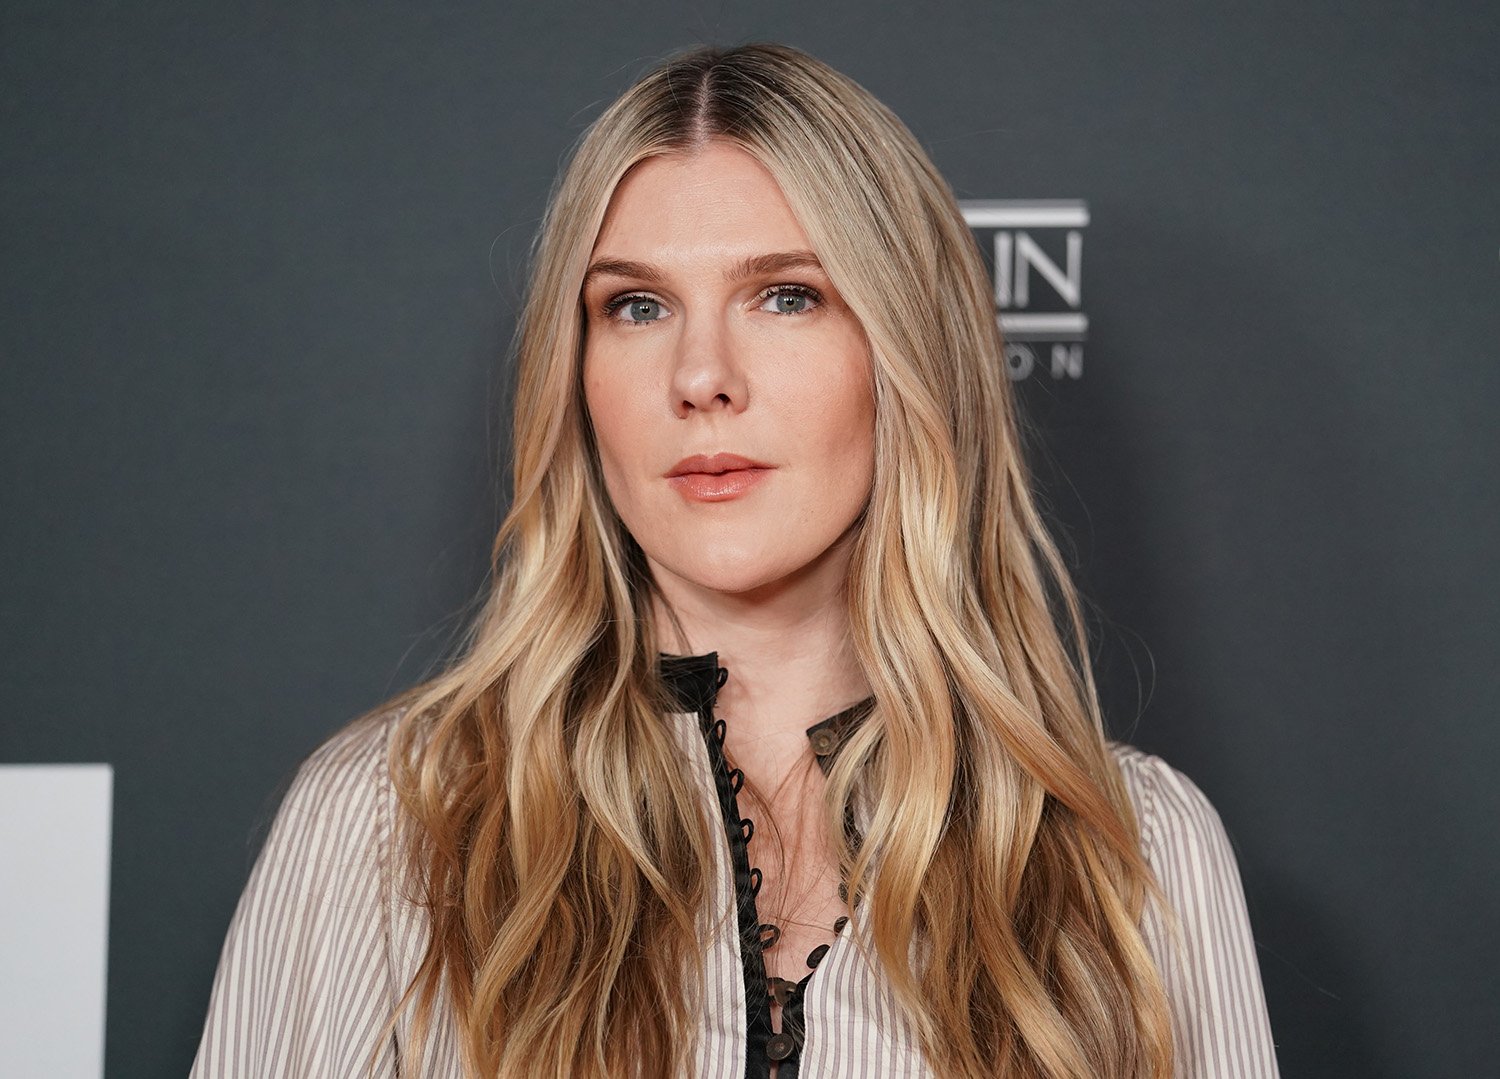 American Horror Story star Lily Rabe at the 'Why We Hate' screening